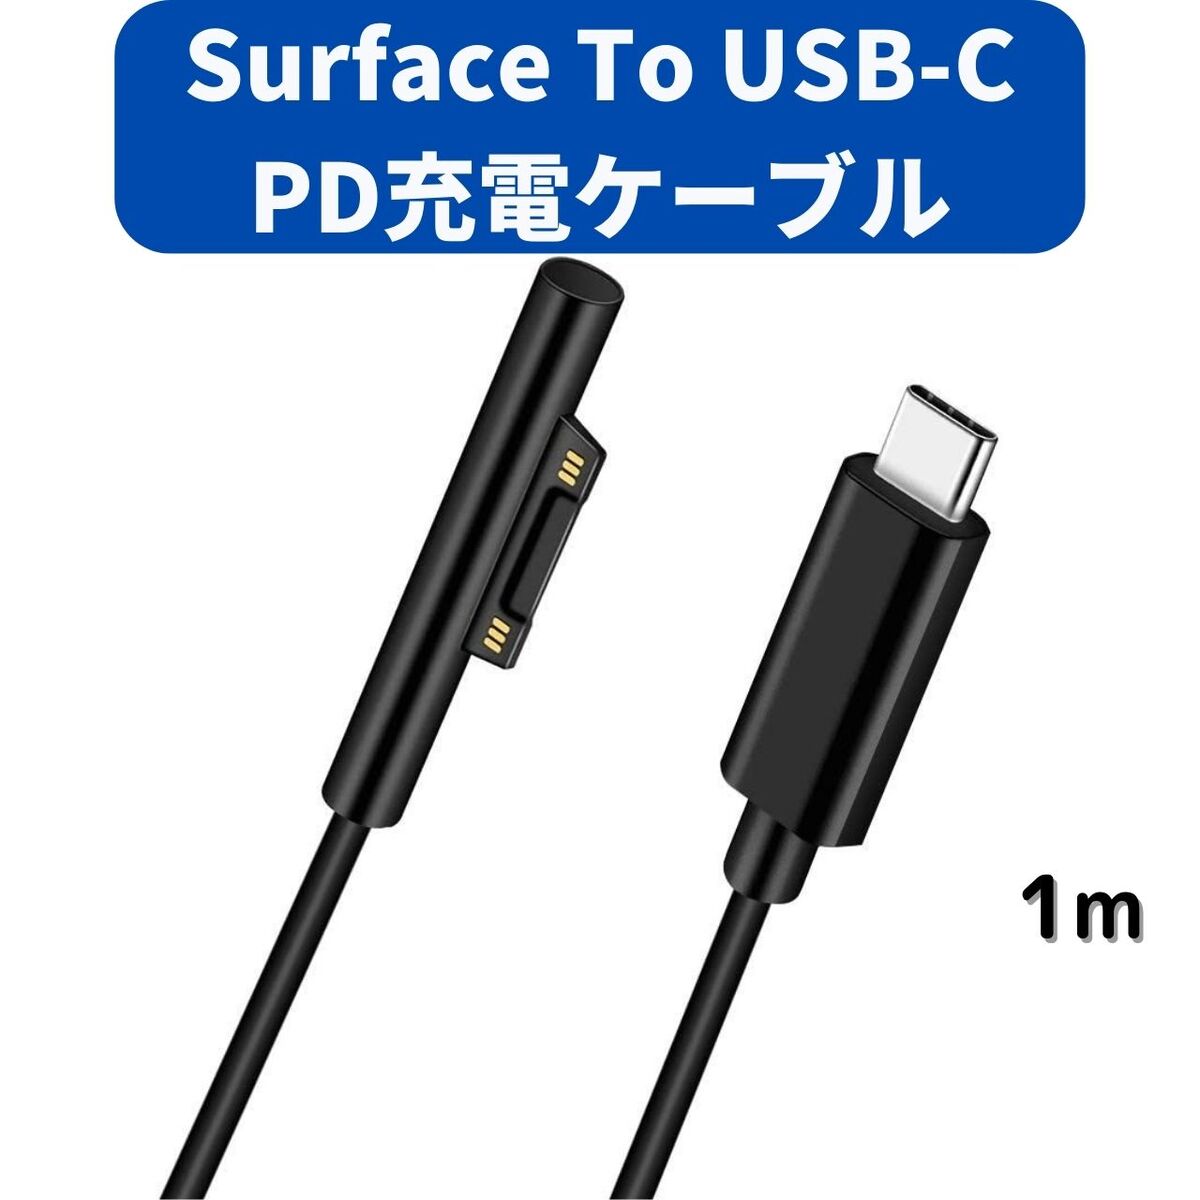 Surface ť֥ Type-C Ѵ PD ®  ֥å 45w15vʾPDŴ郎ɬ Connect to TYPE-C 15VPDŤб 1m